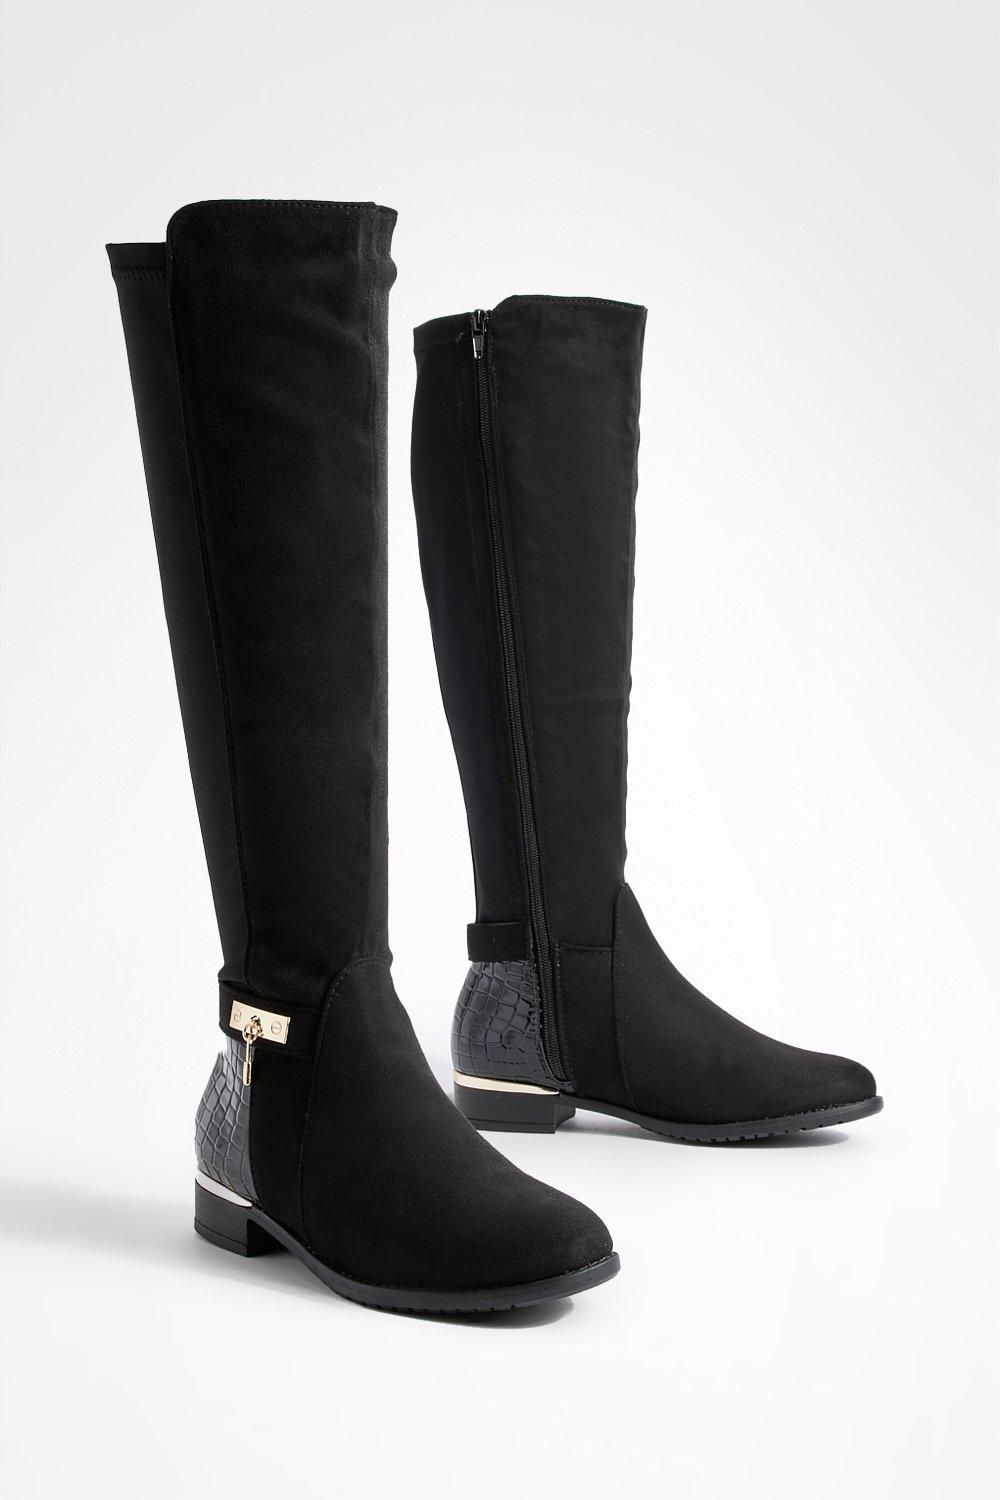 flat black leather knee high boots womens